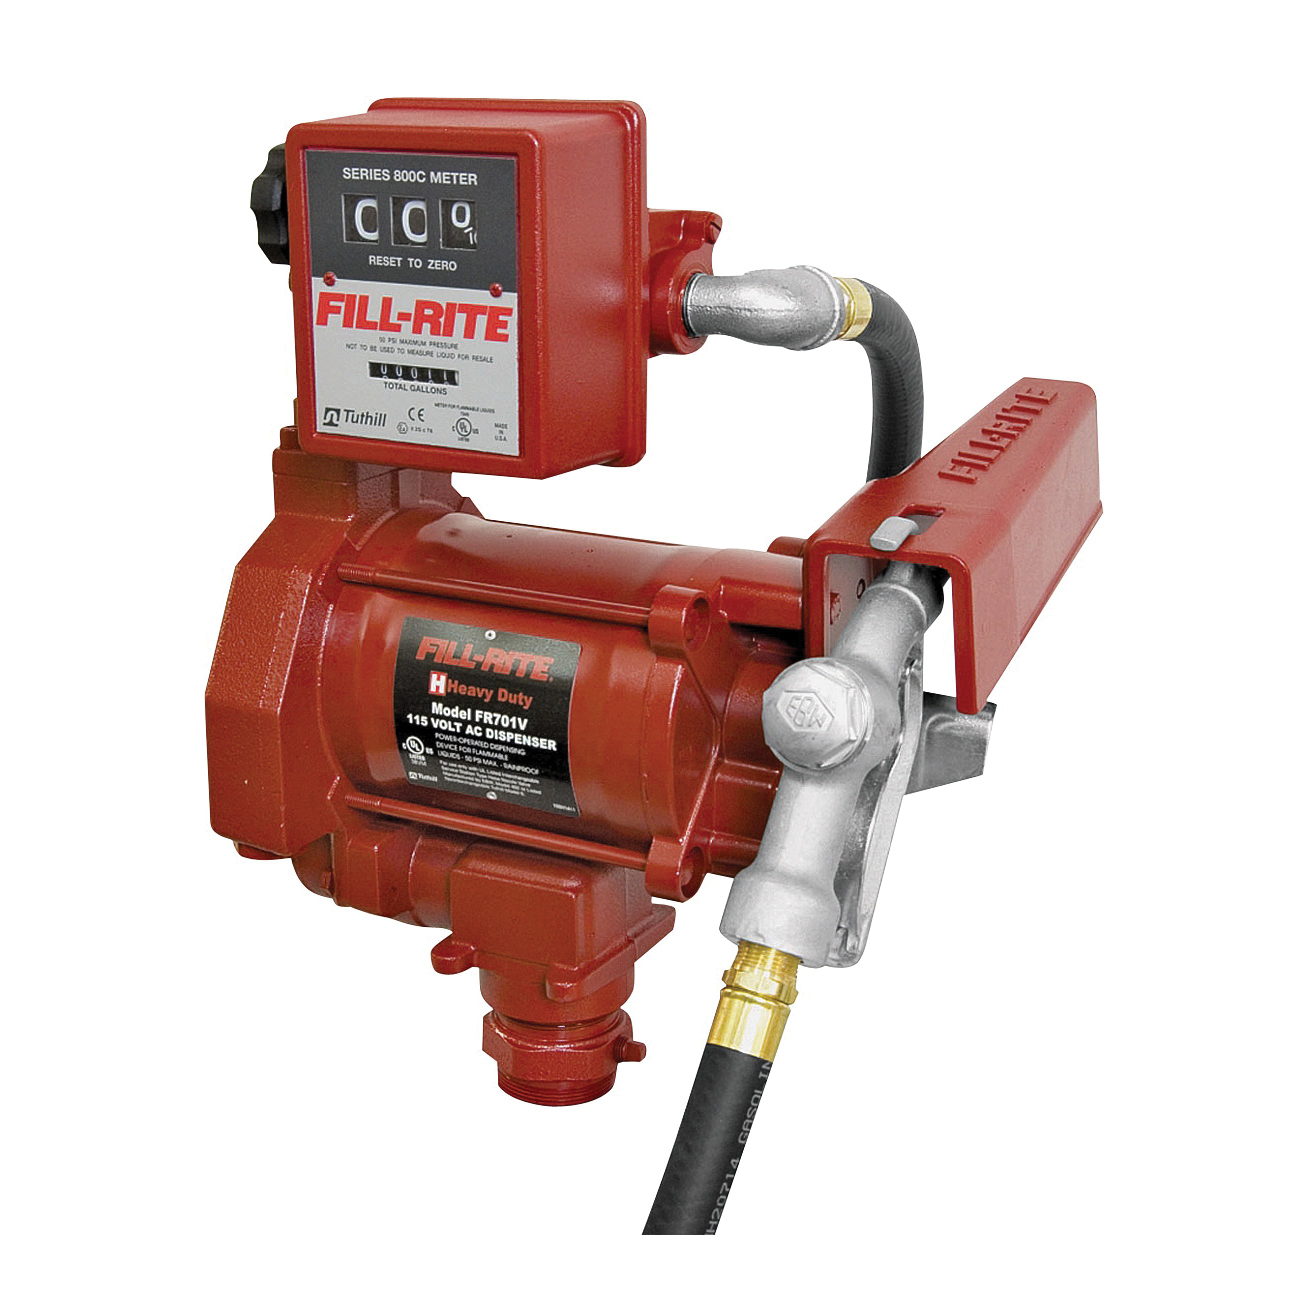 FR701V Fuel Transfer Pump, Motor: 1/3 hp, 115 VAC, 5.5 A, 1725 rpm, 30 min Duty Cycle, 3/4 in Outlet, Iron